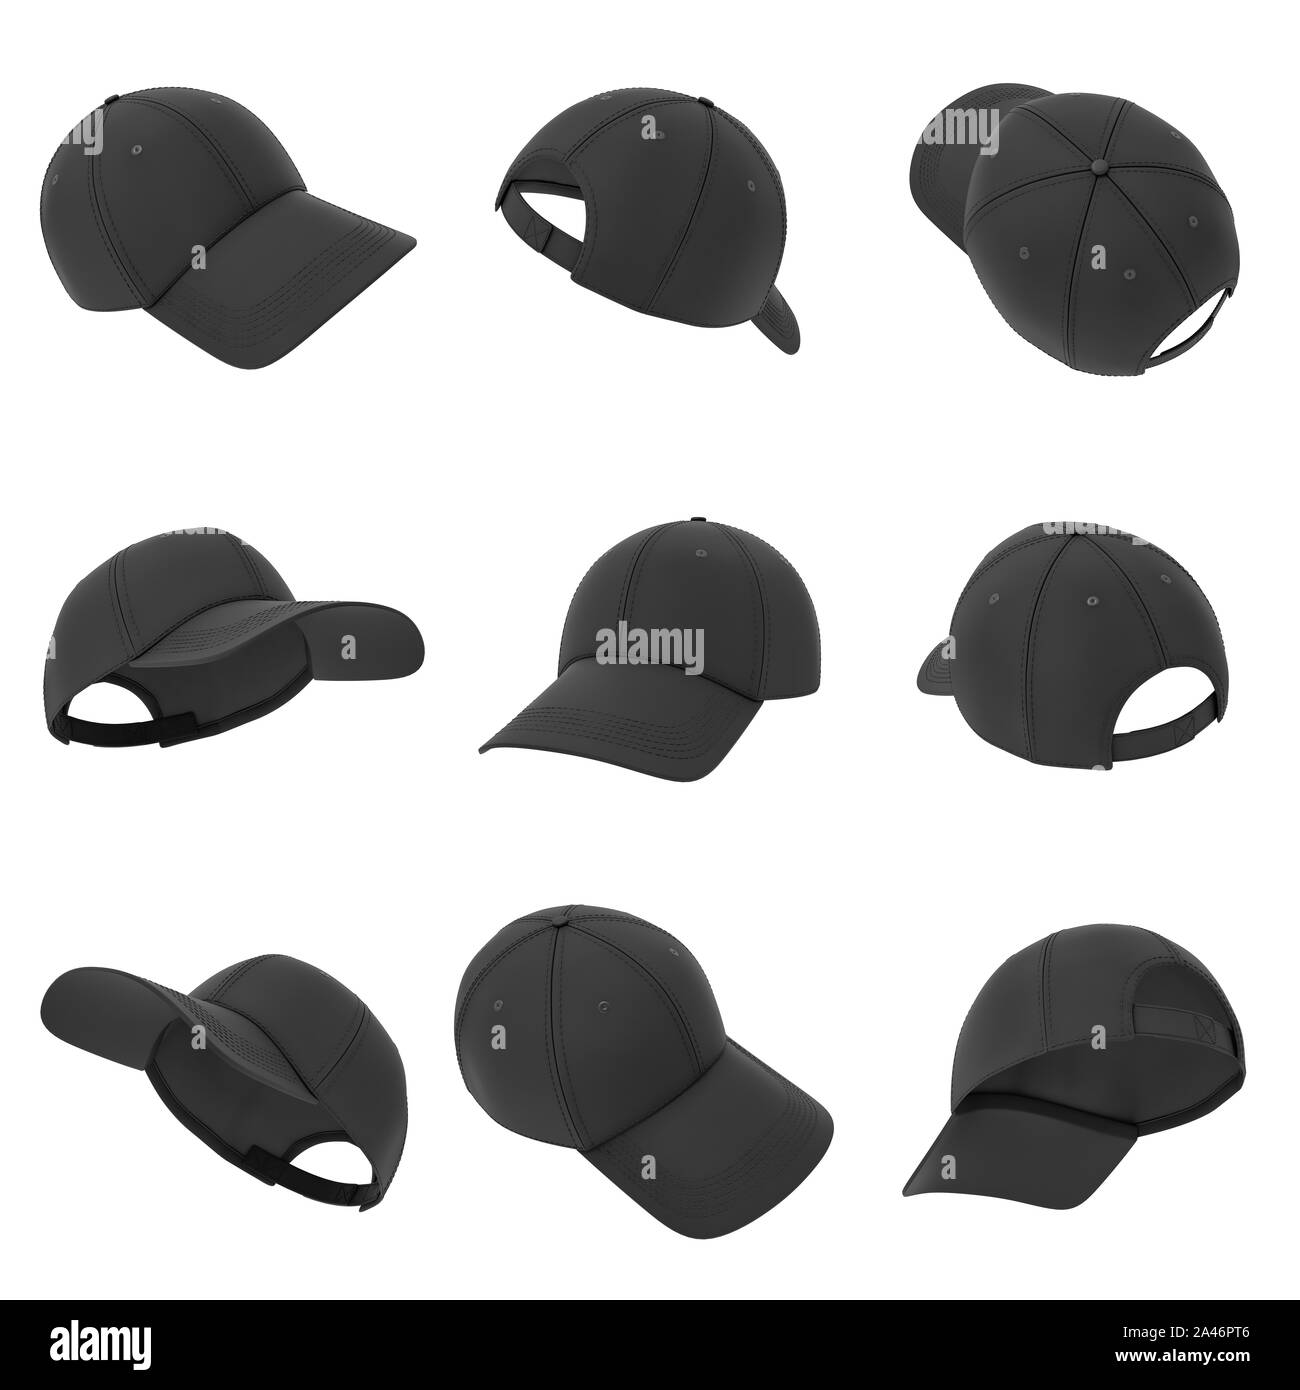 3d rendering of many black baseball caps hanging on a white background in different angles. Baseball hat. Casual headwear. Sport style. Stock Photo